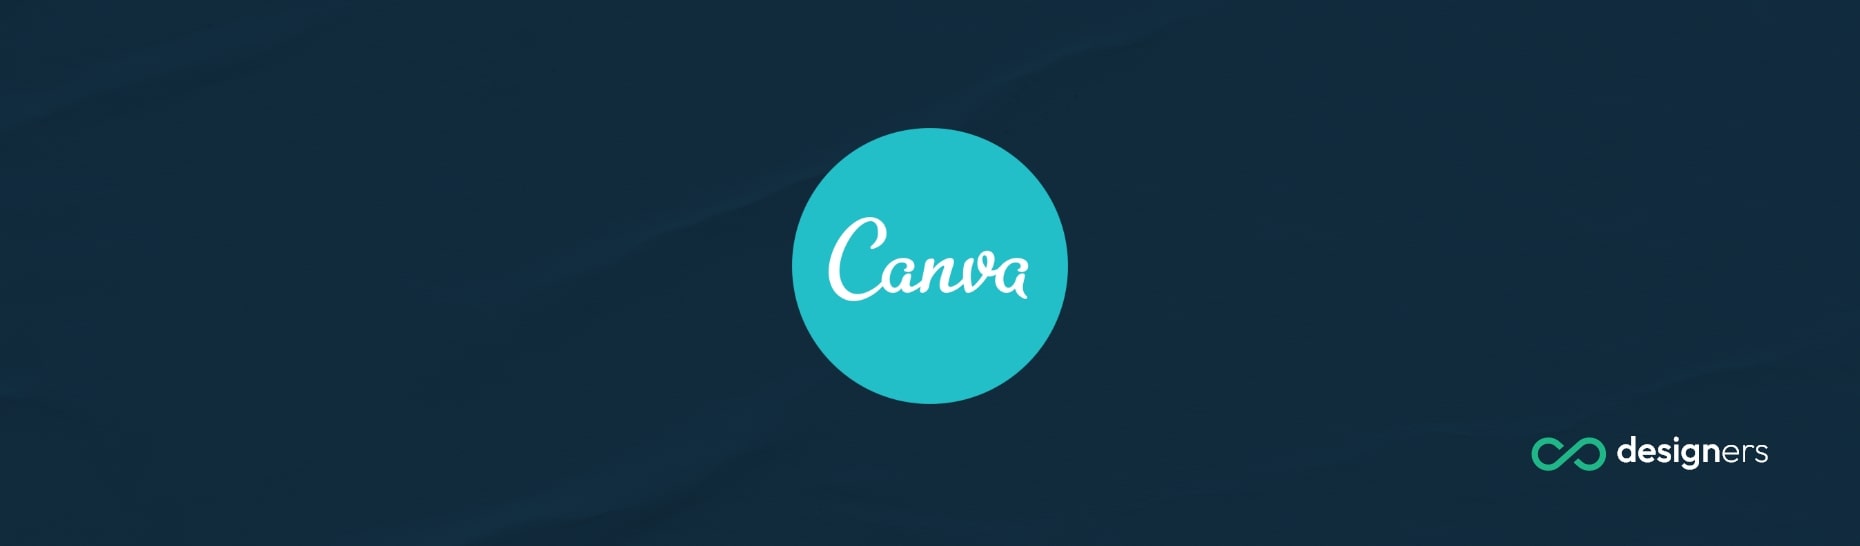 What Type of Social Media Is Canva?